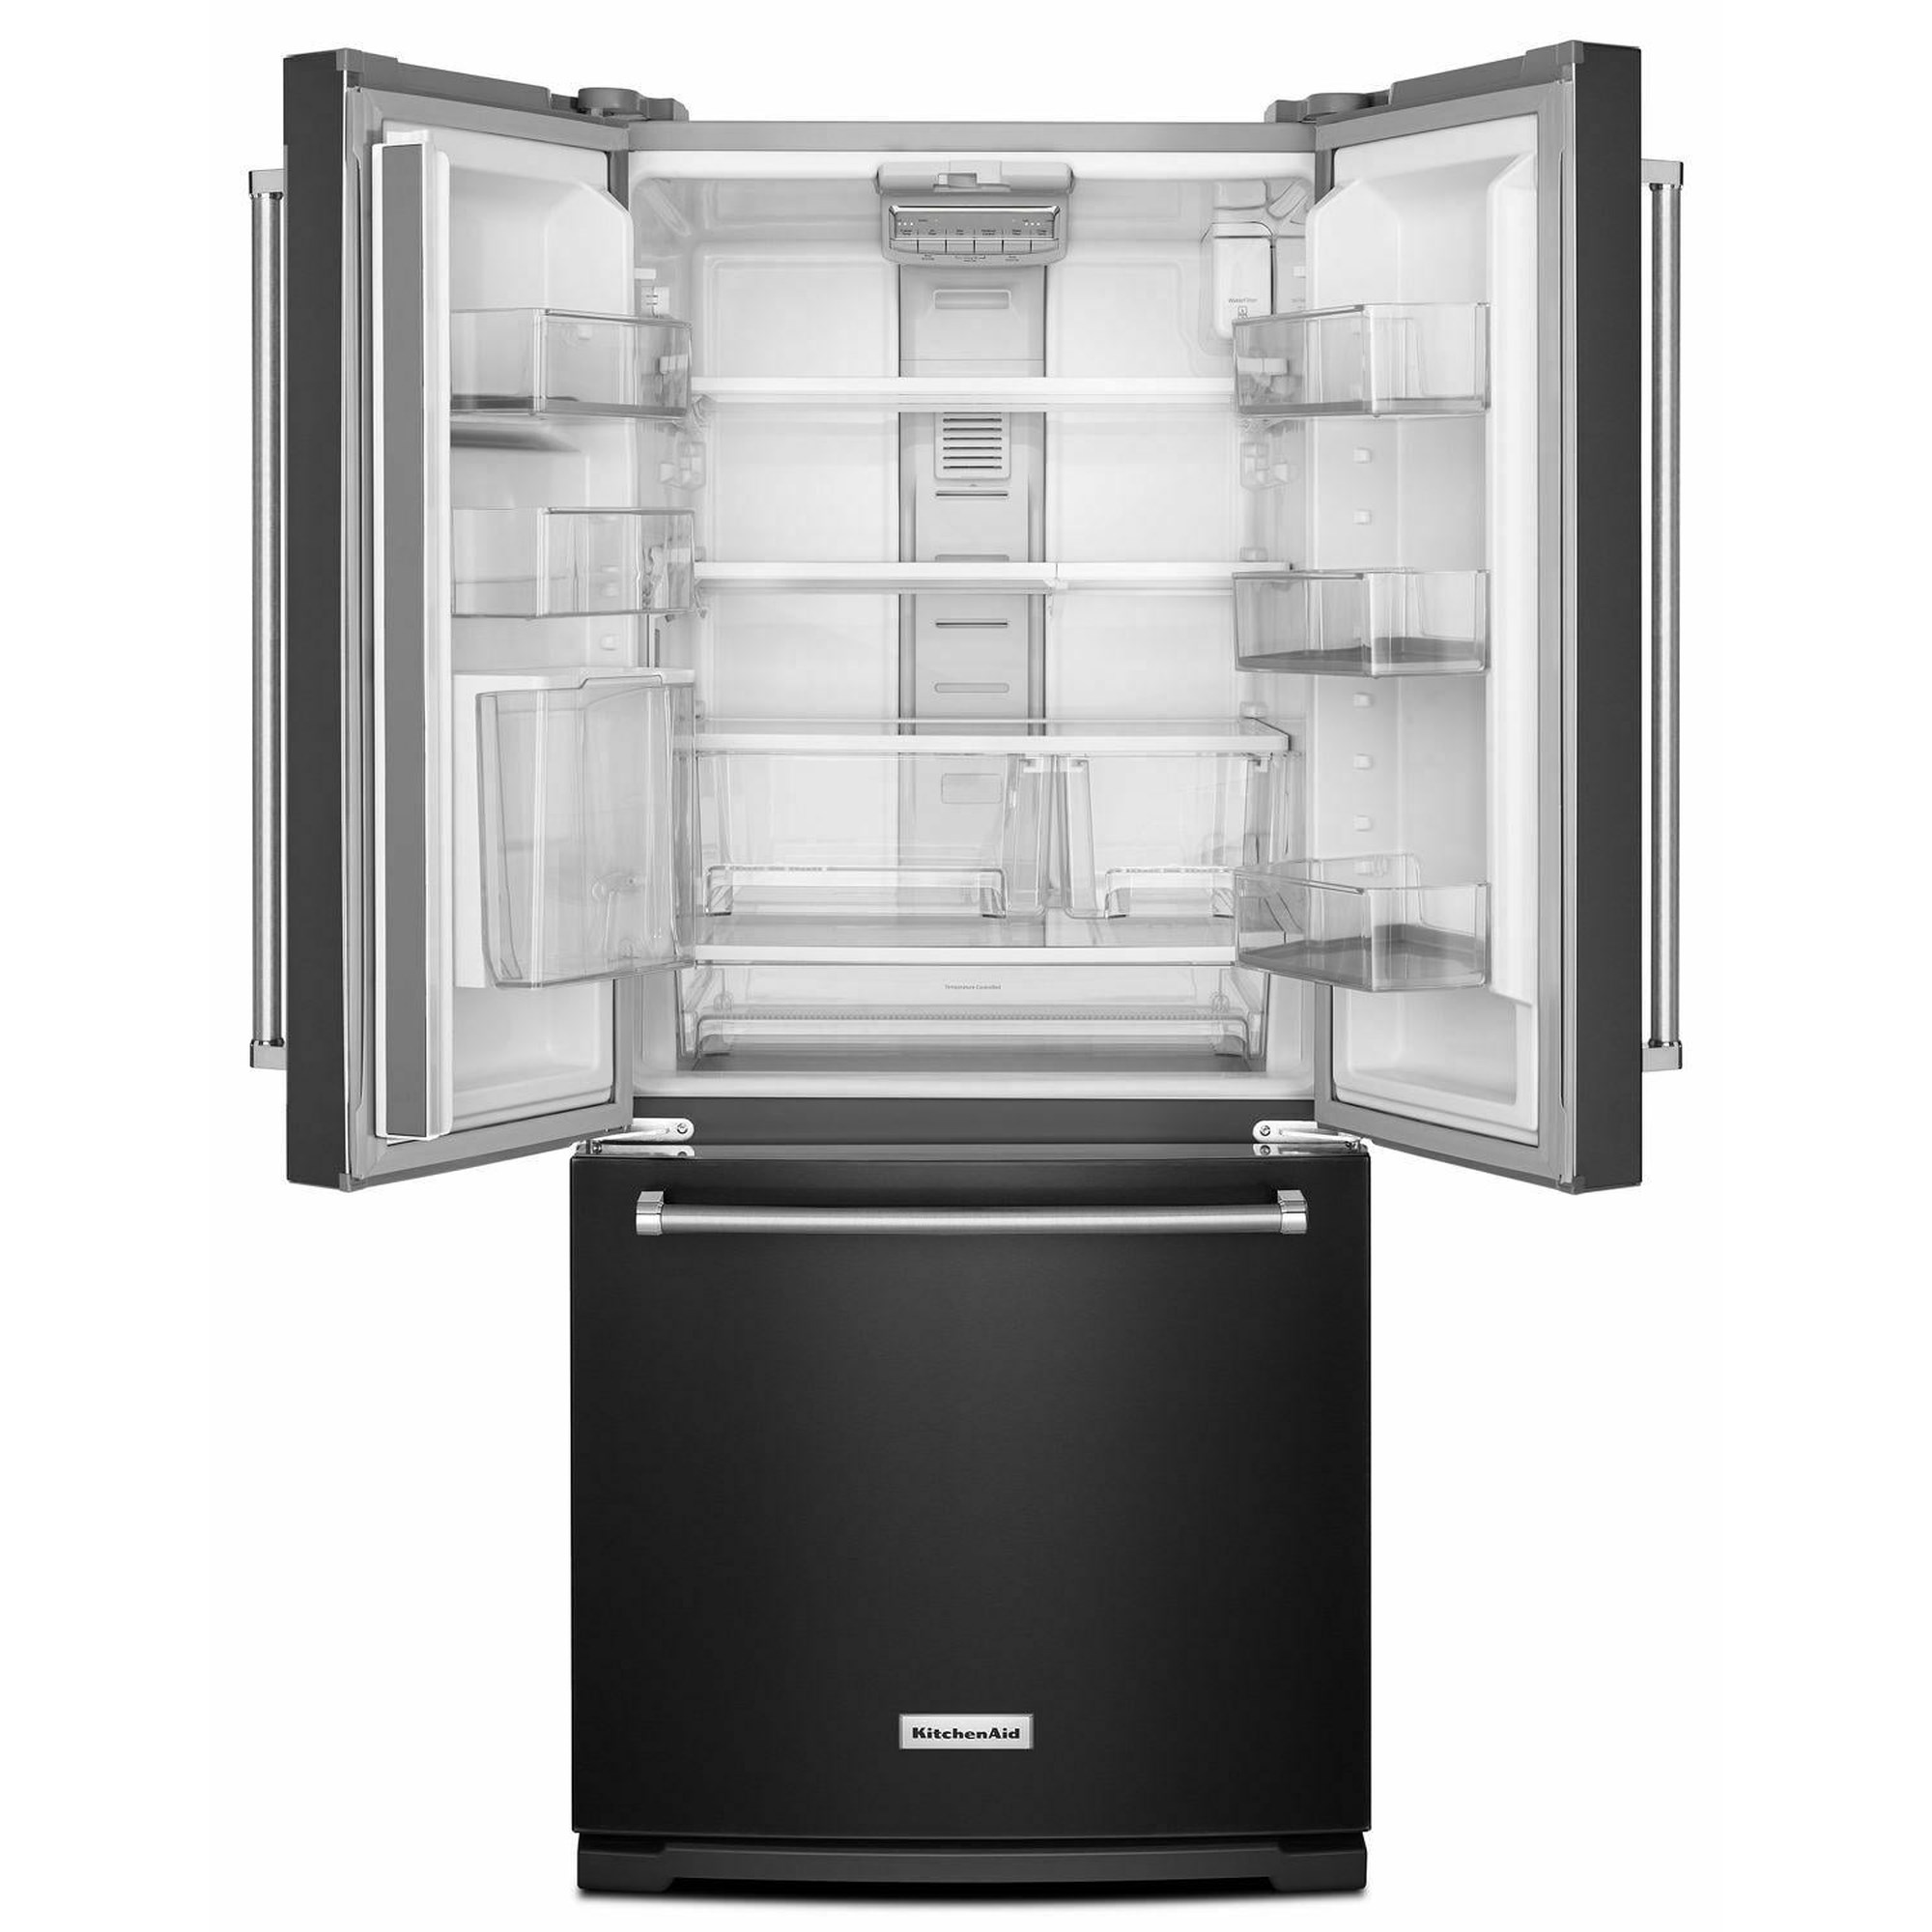 Stainless Steel 20 cu. ft. French Door Refrigerator